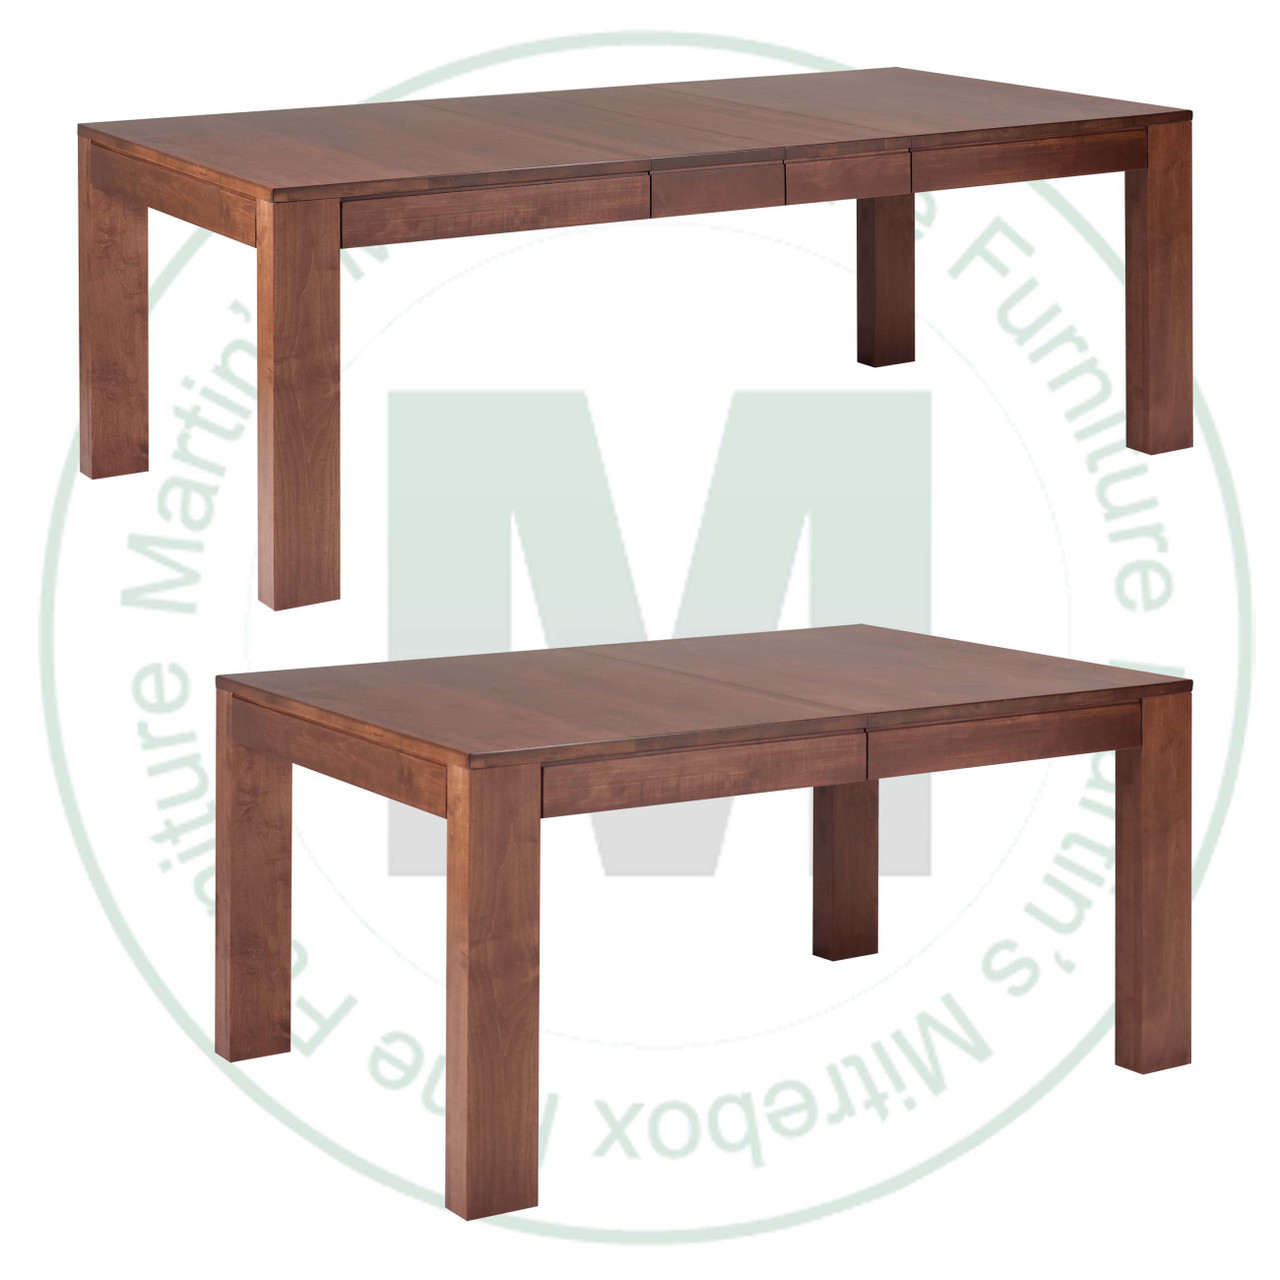 Wormy Maple Mannheim Extension Harvest Table 48''D x 60''W x 30''H With 3 - 12'' Leaves